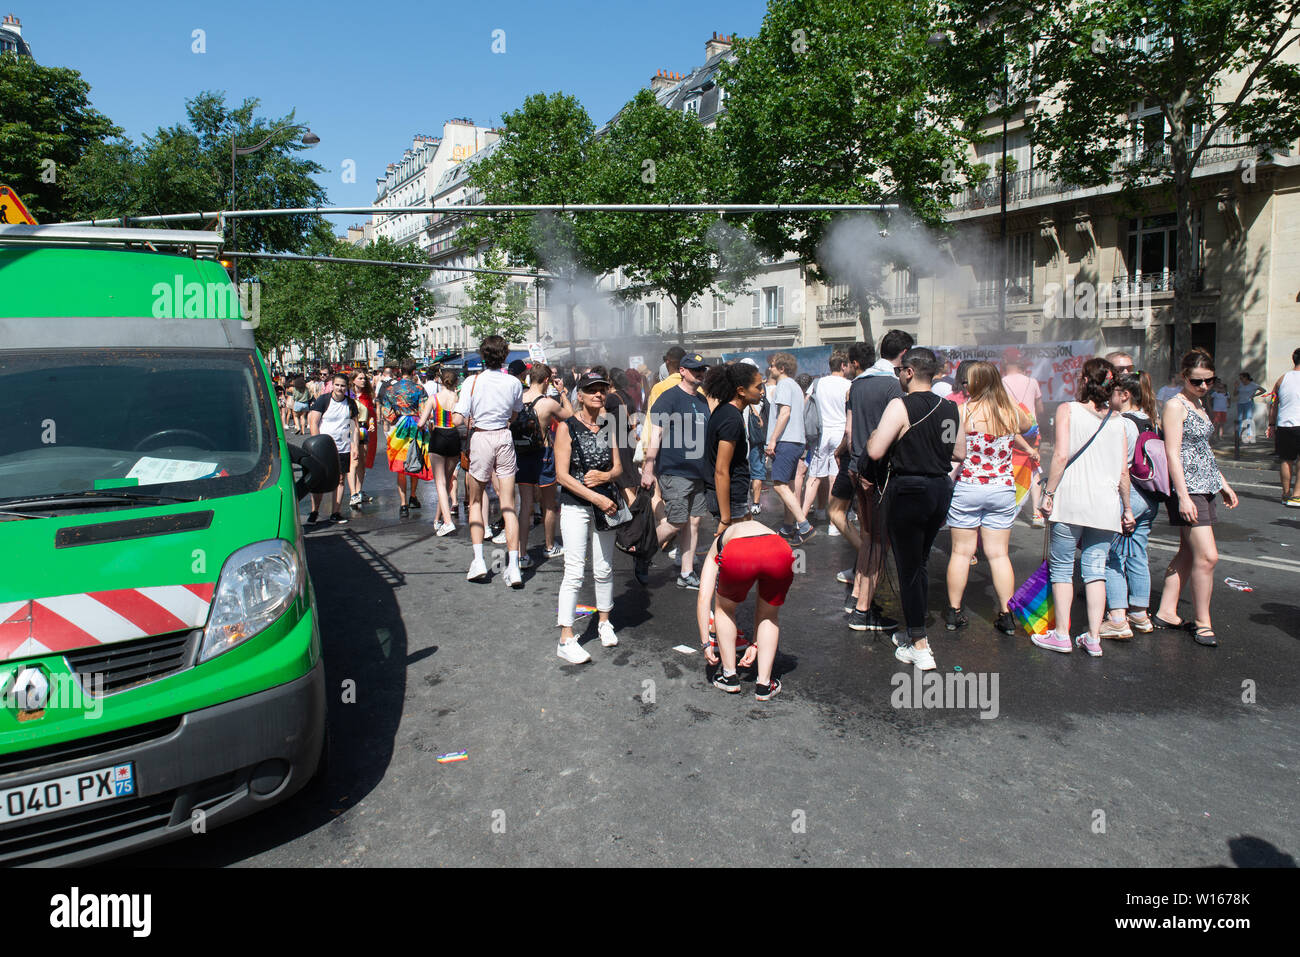 People enjoy water canons put in place by Paris municipal services to cool down participants at the Paris 2019 Gay Pride. Stock Photo